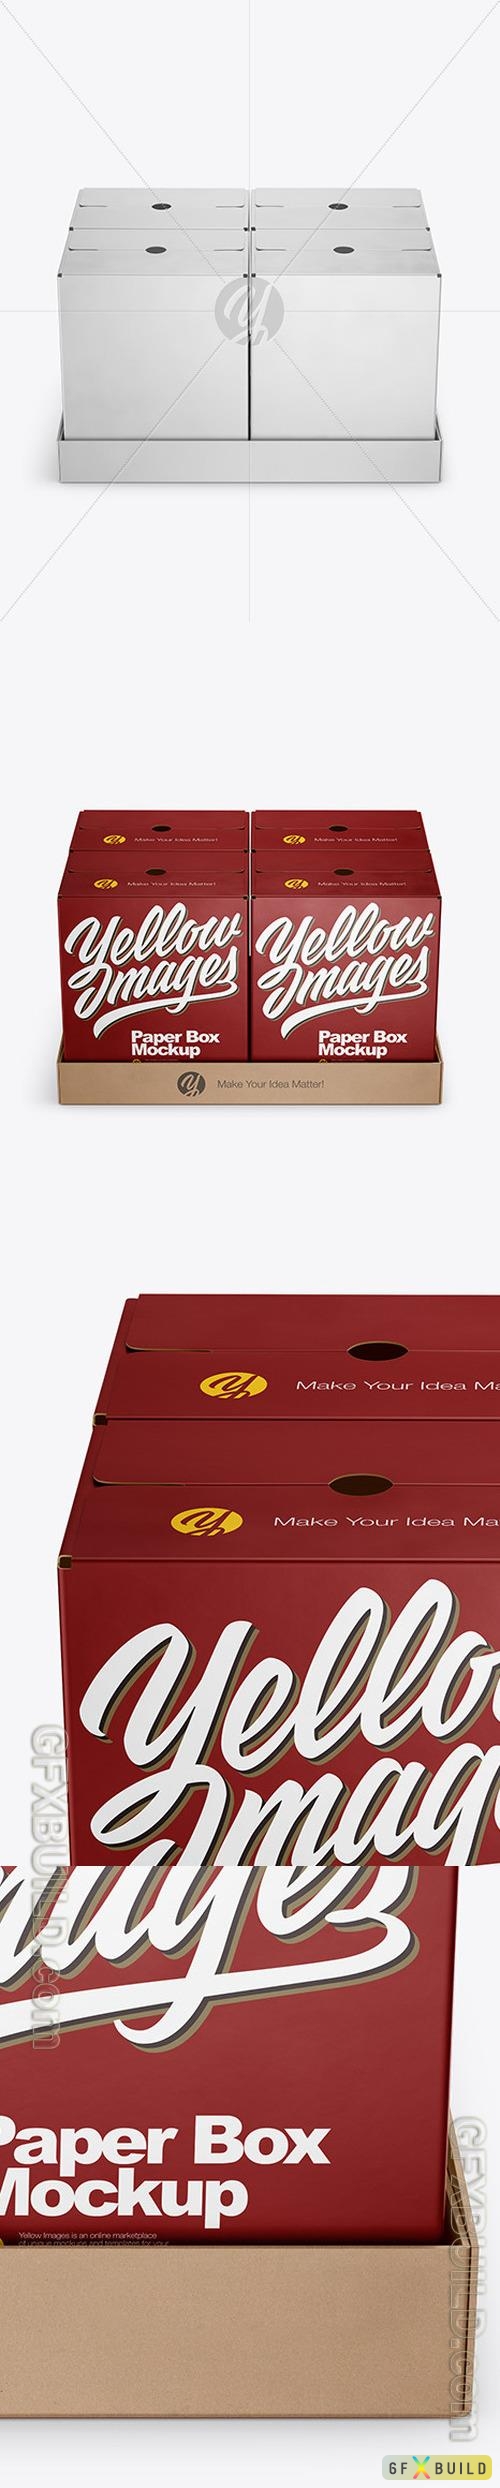 Paper Palette With Four Textured Boxes Mockup 50198